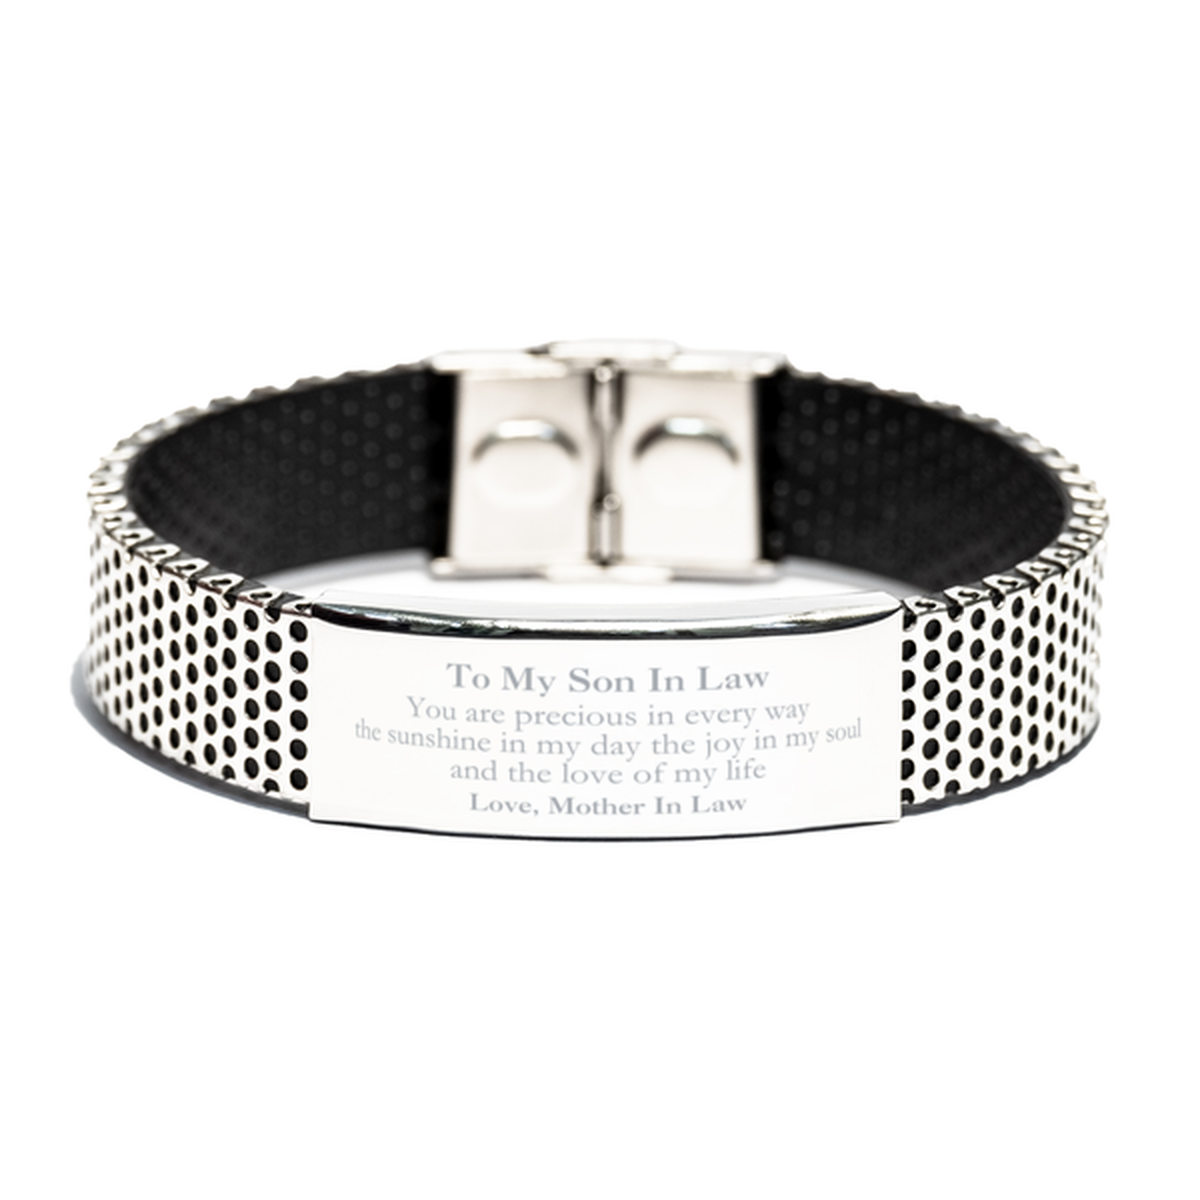 Graduation Gifts for Son In Law Stainless Steel Bracelet Present from Mother In Law, Christmas Son In Law Birthday Gifts Son In Law You are precious in every way the sunshine in my day. Love, Mother In Law